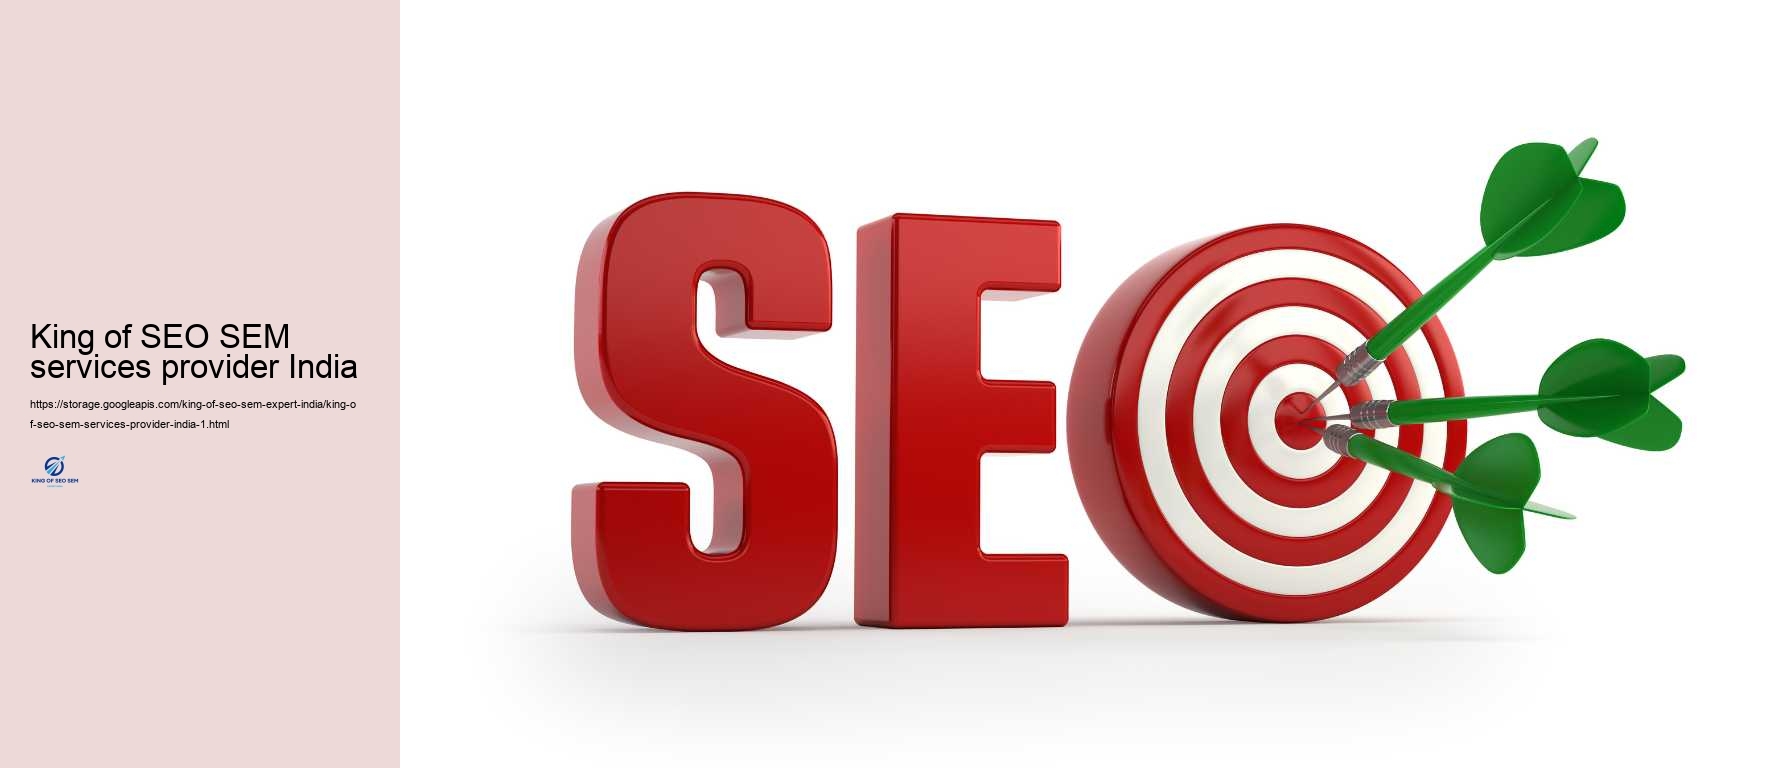 King of SEO SEM services provider India